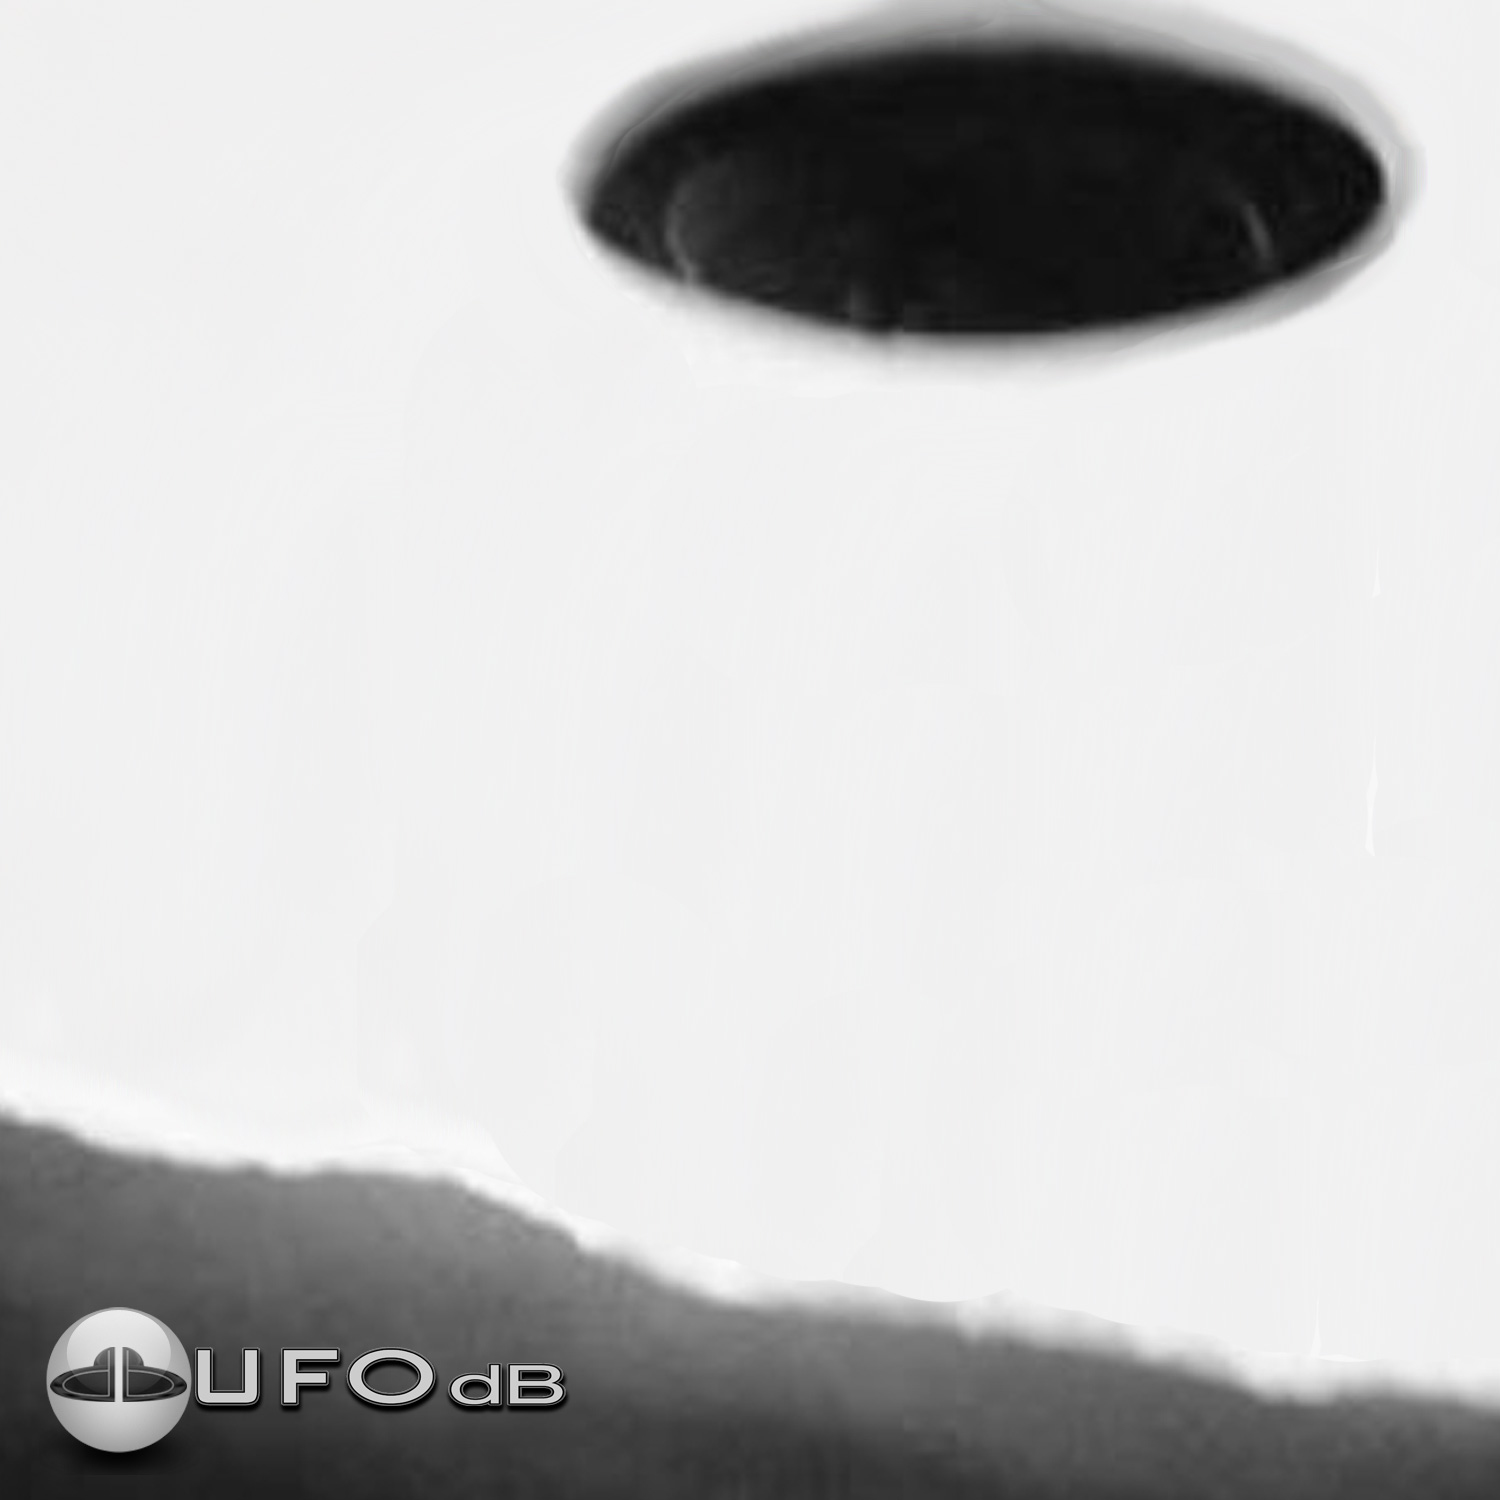 UFO over city of Oulu, Finland in northern region of Ostrobothnia UFO Picture #41-1